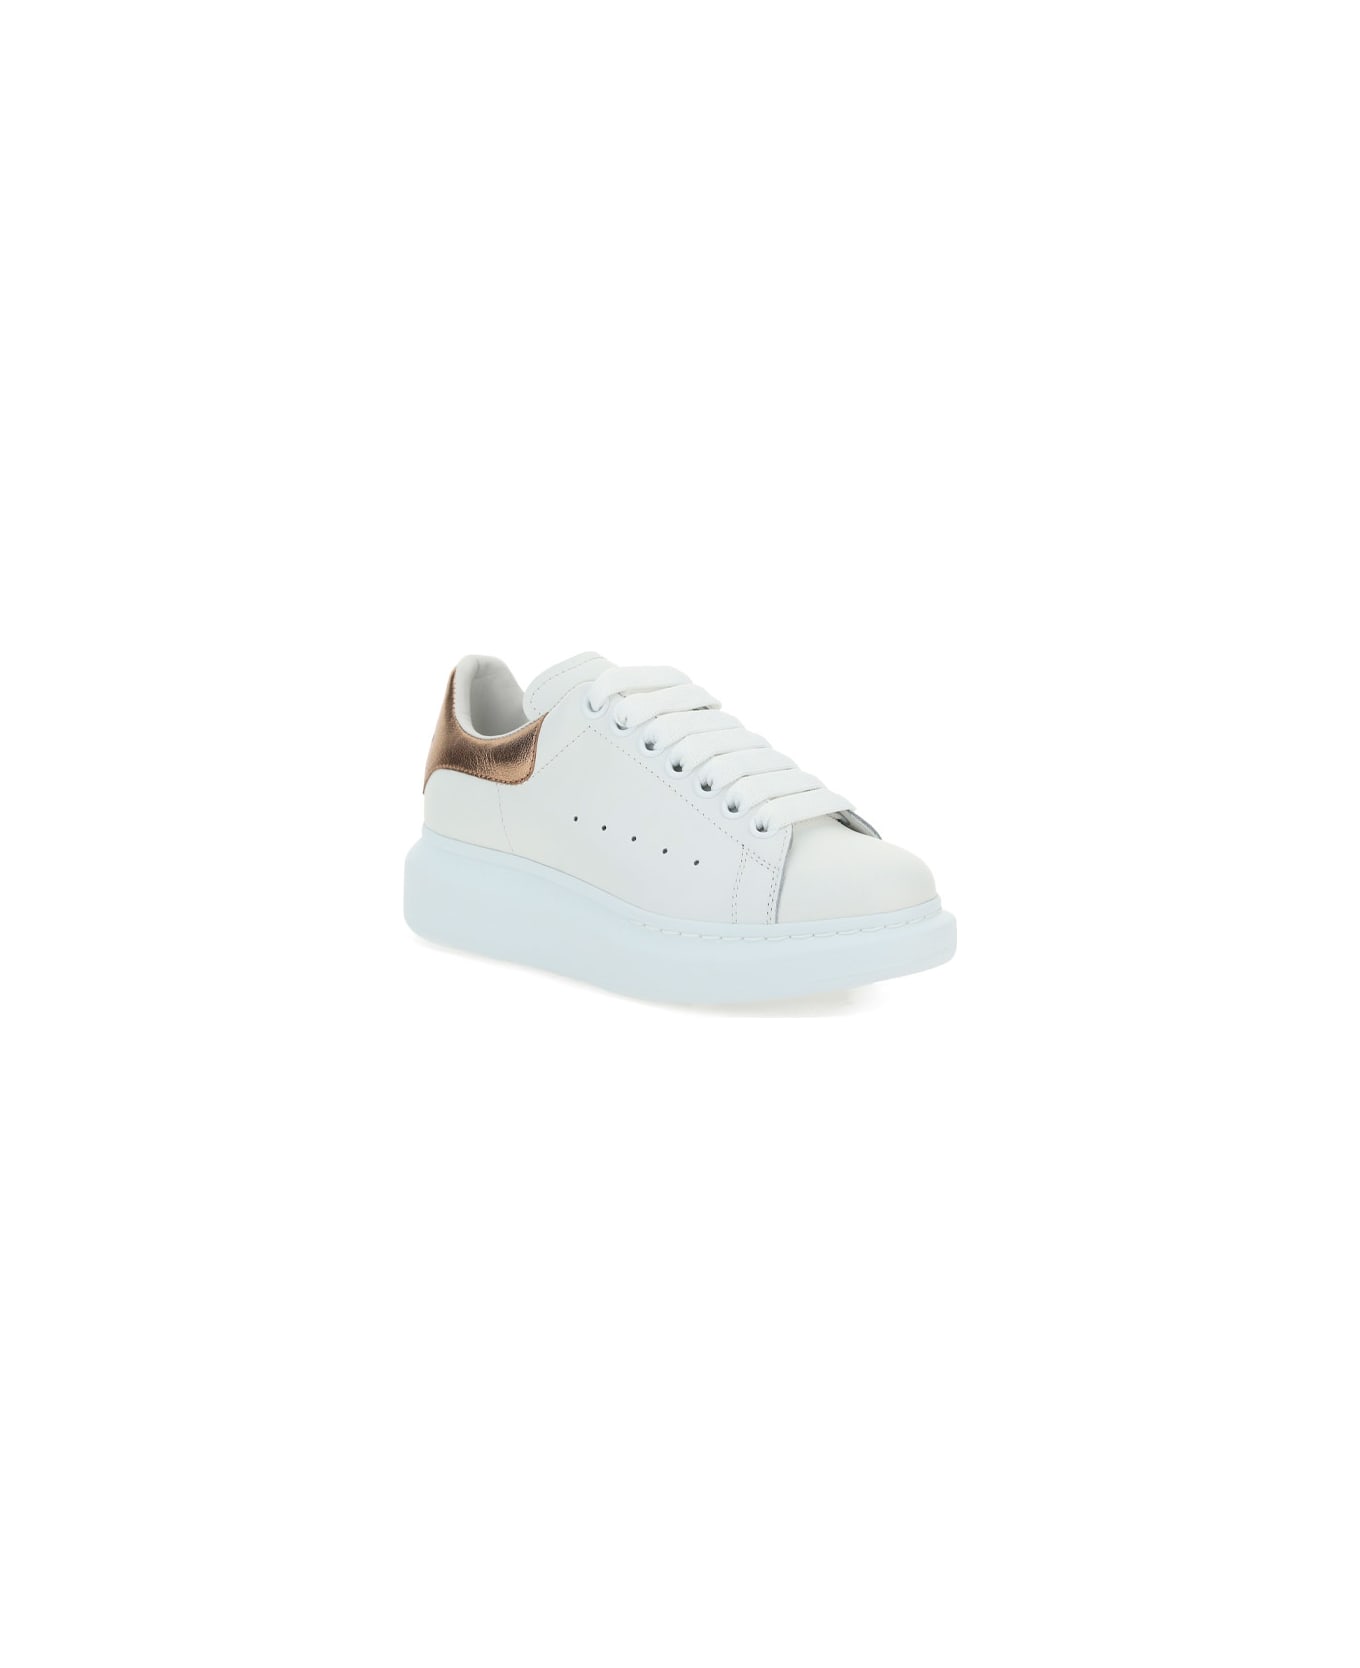 Alexander McQueen Sneakers - White/rose Gold 171